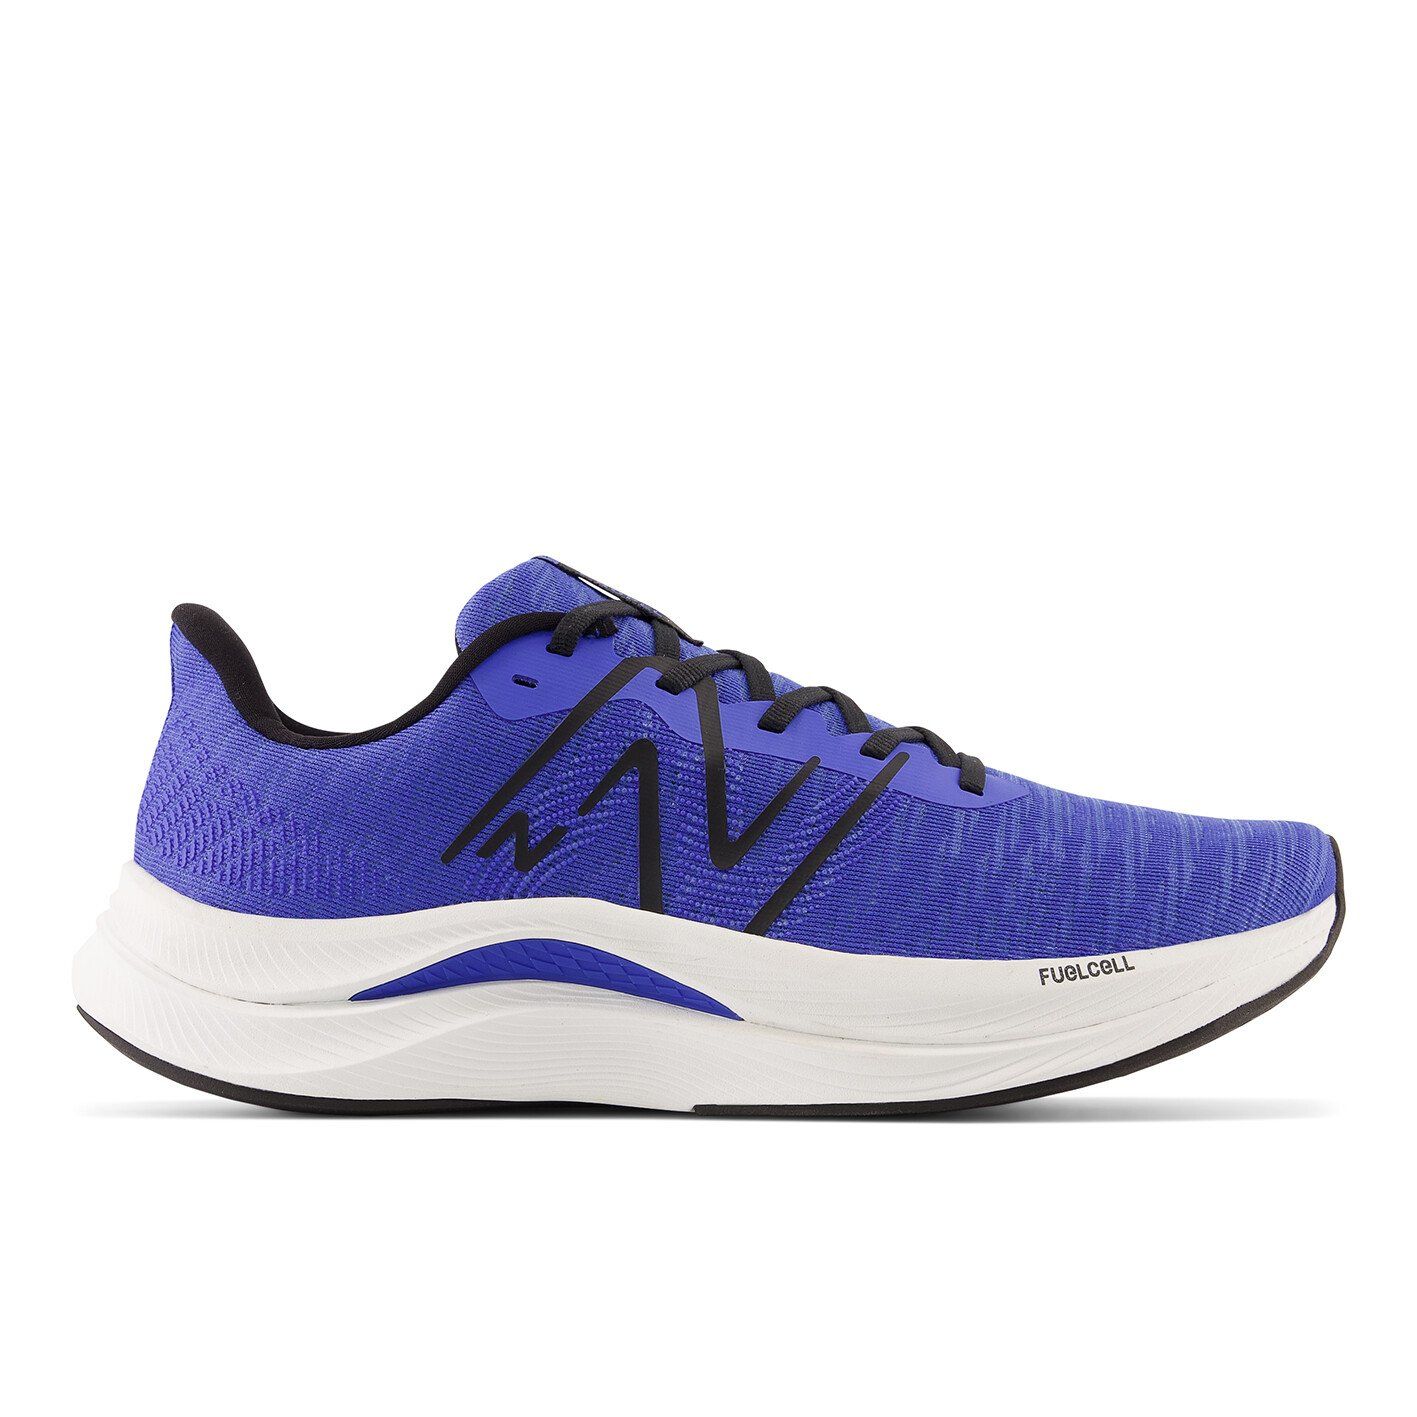 New Balance - MFCPRLN4 Fuel Cell Propel v4